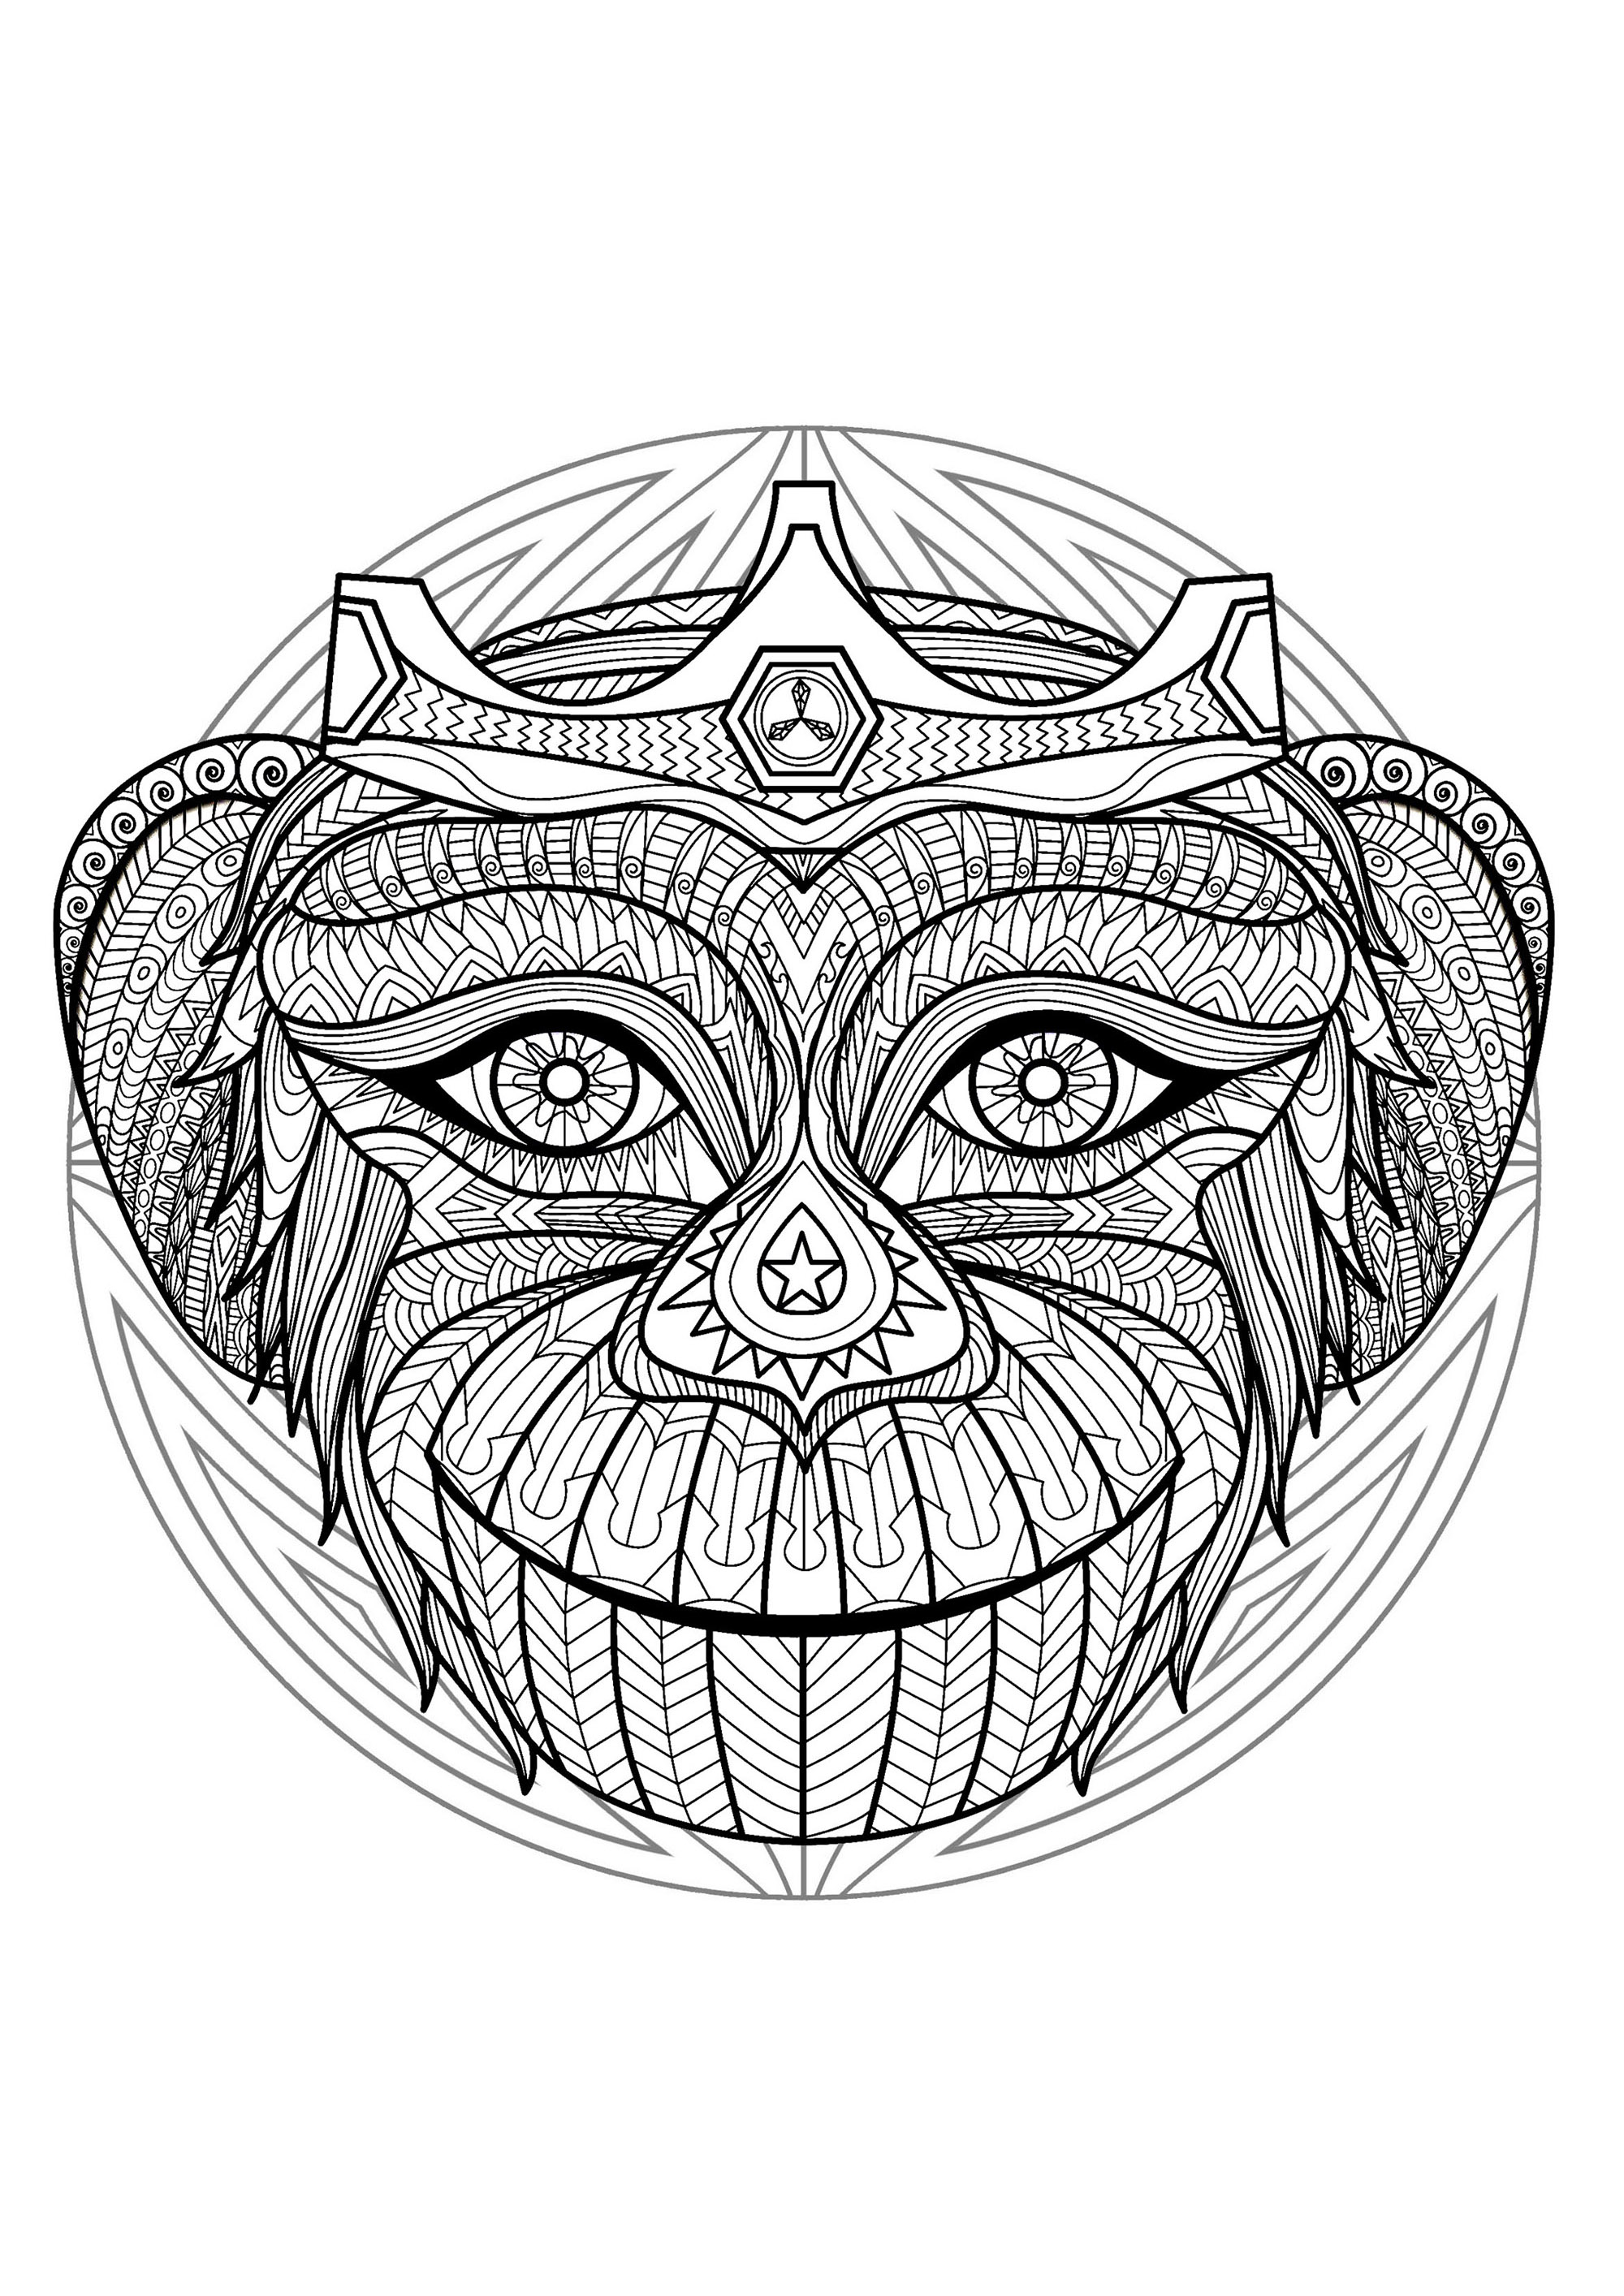 This monkey is just waiting to be colored in this pretty original Mandala, it's up to you to print it and let your artistic sense guide you.